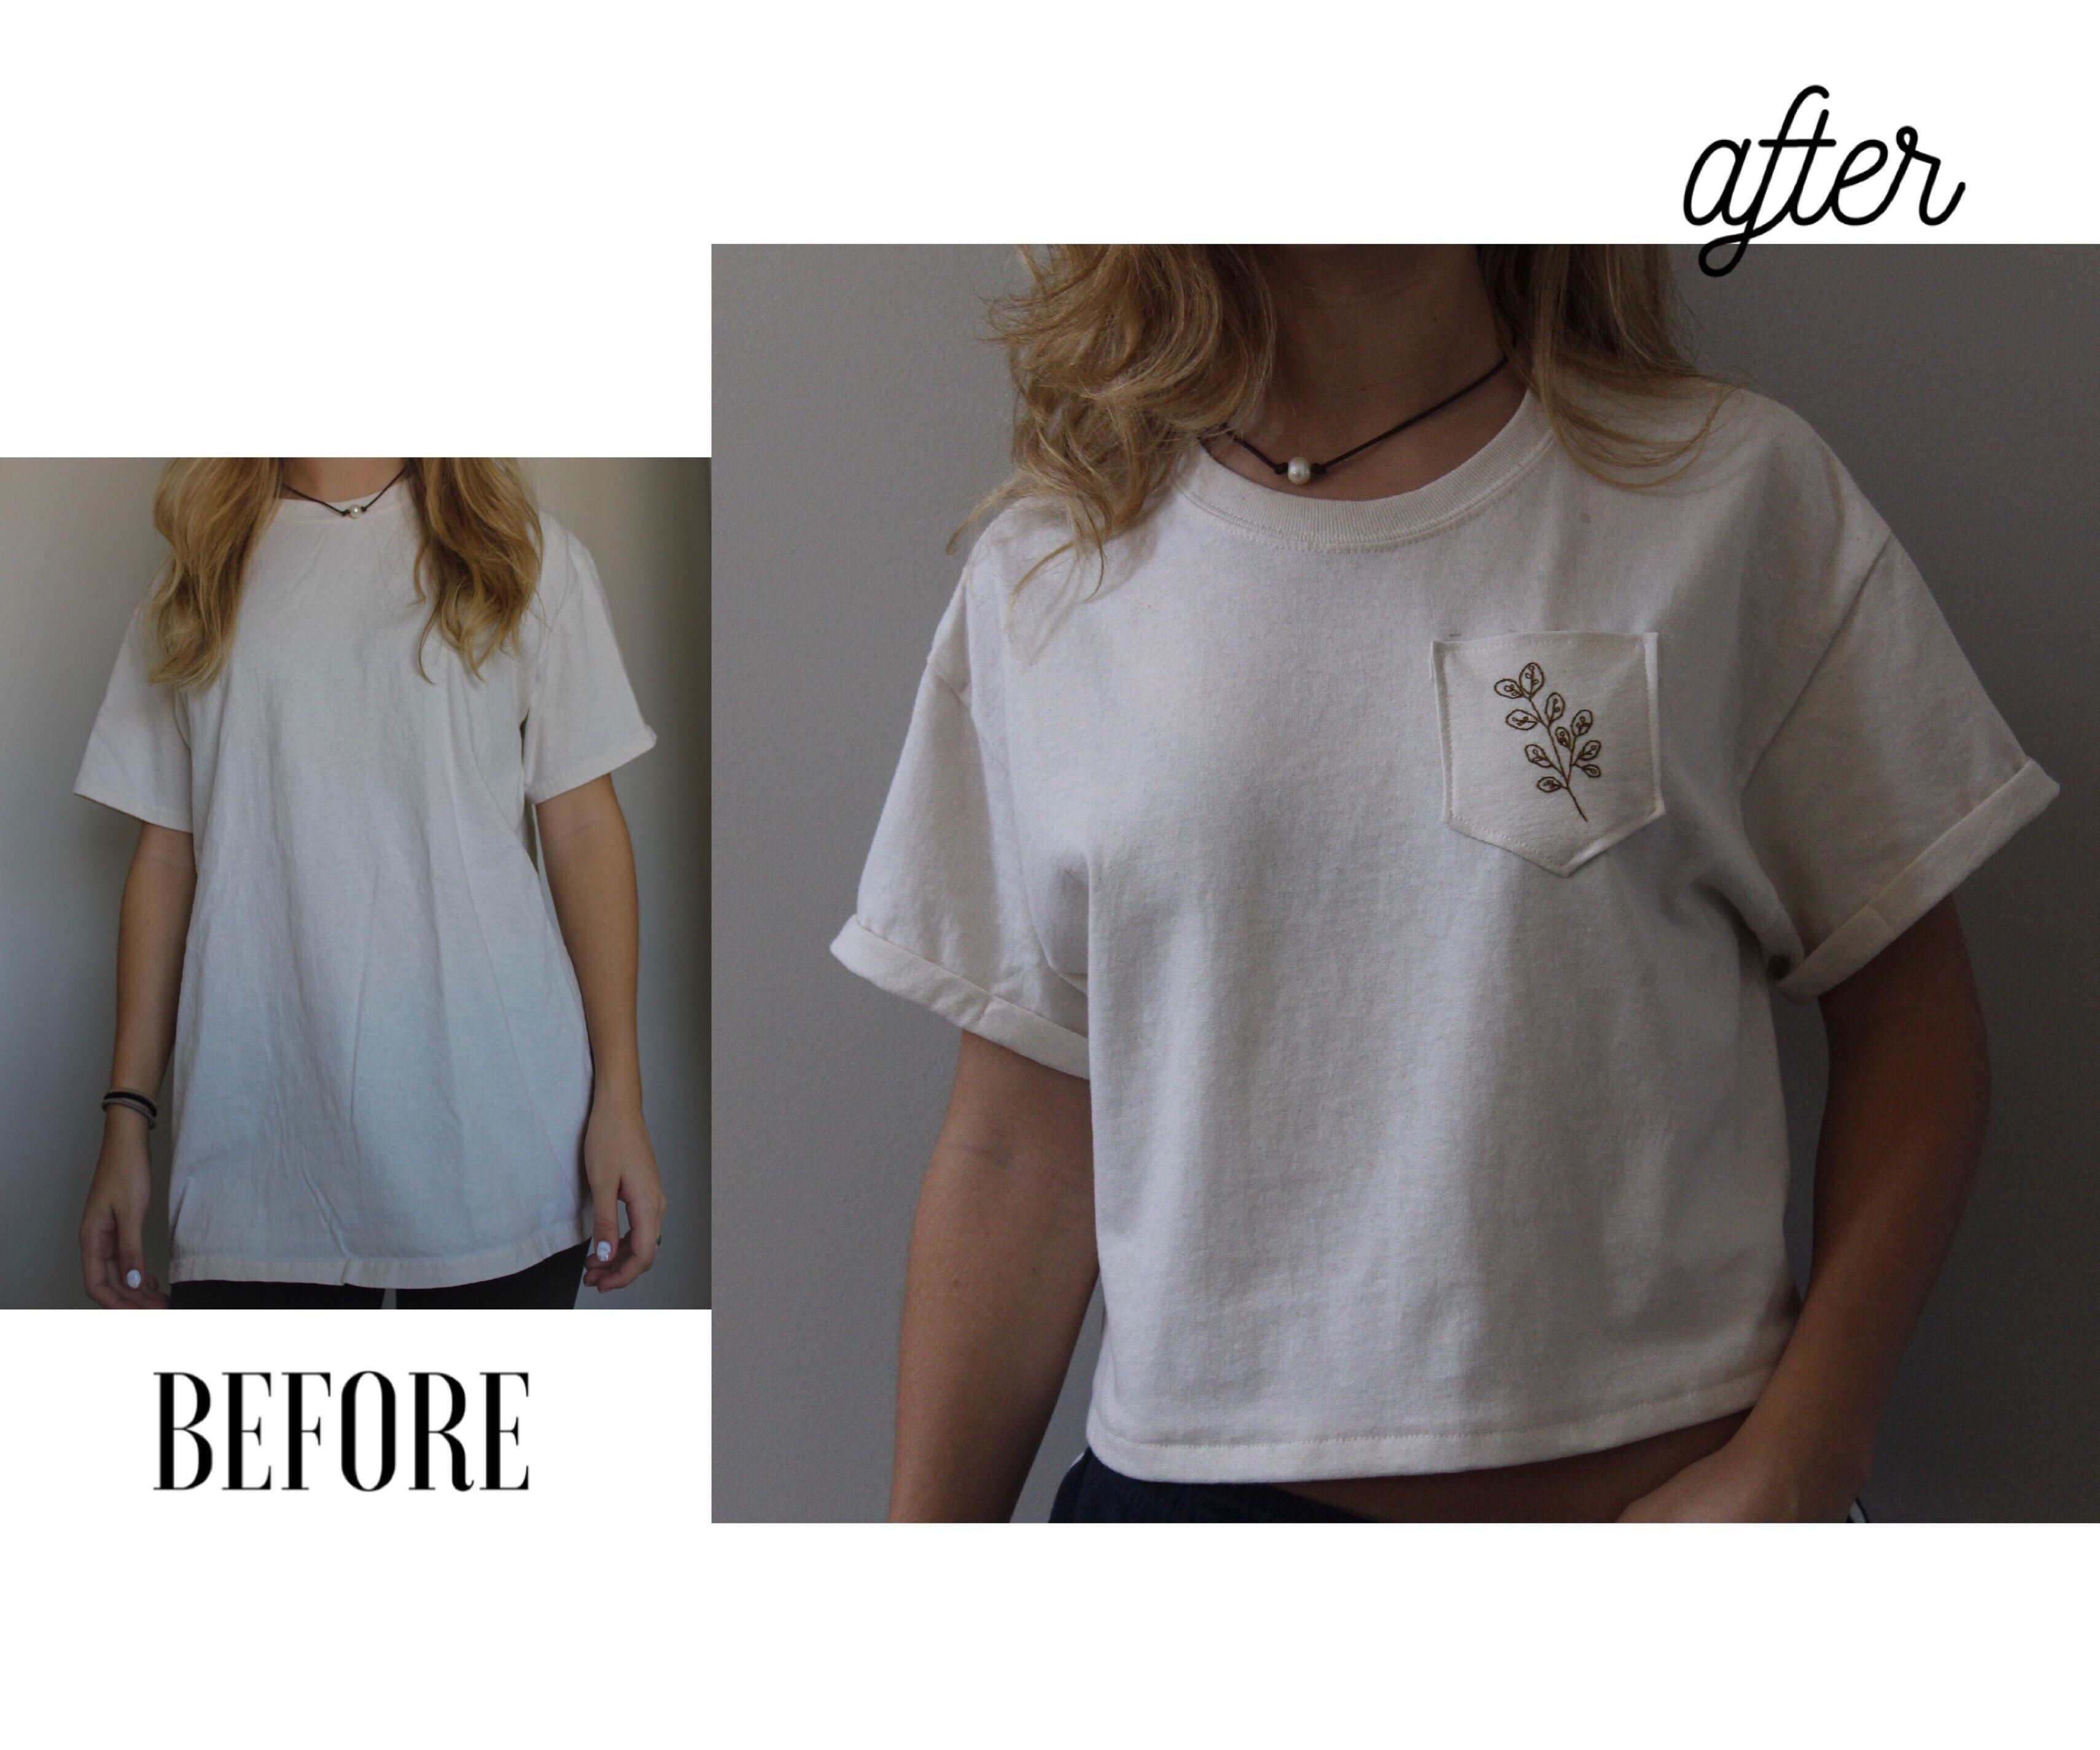 How To Cut A Tshirt Into A Baggy Crop Top? – solowomen